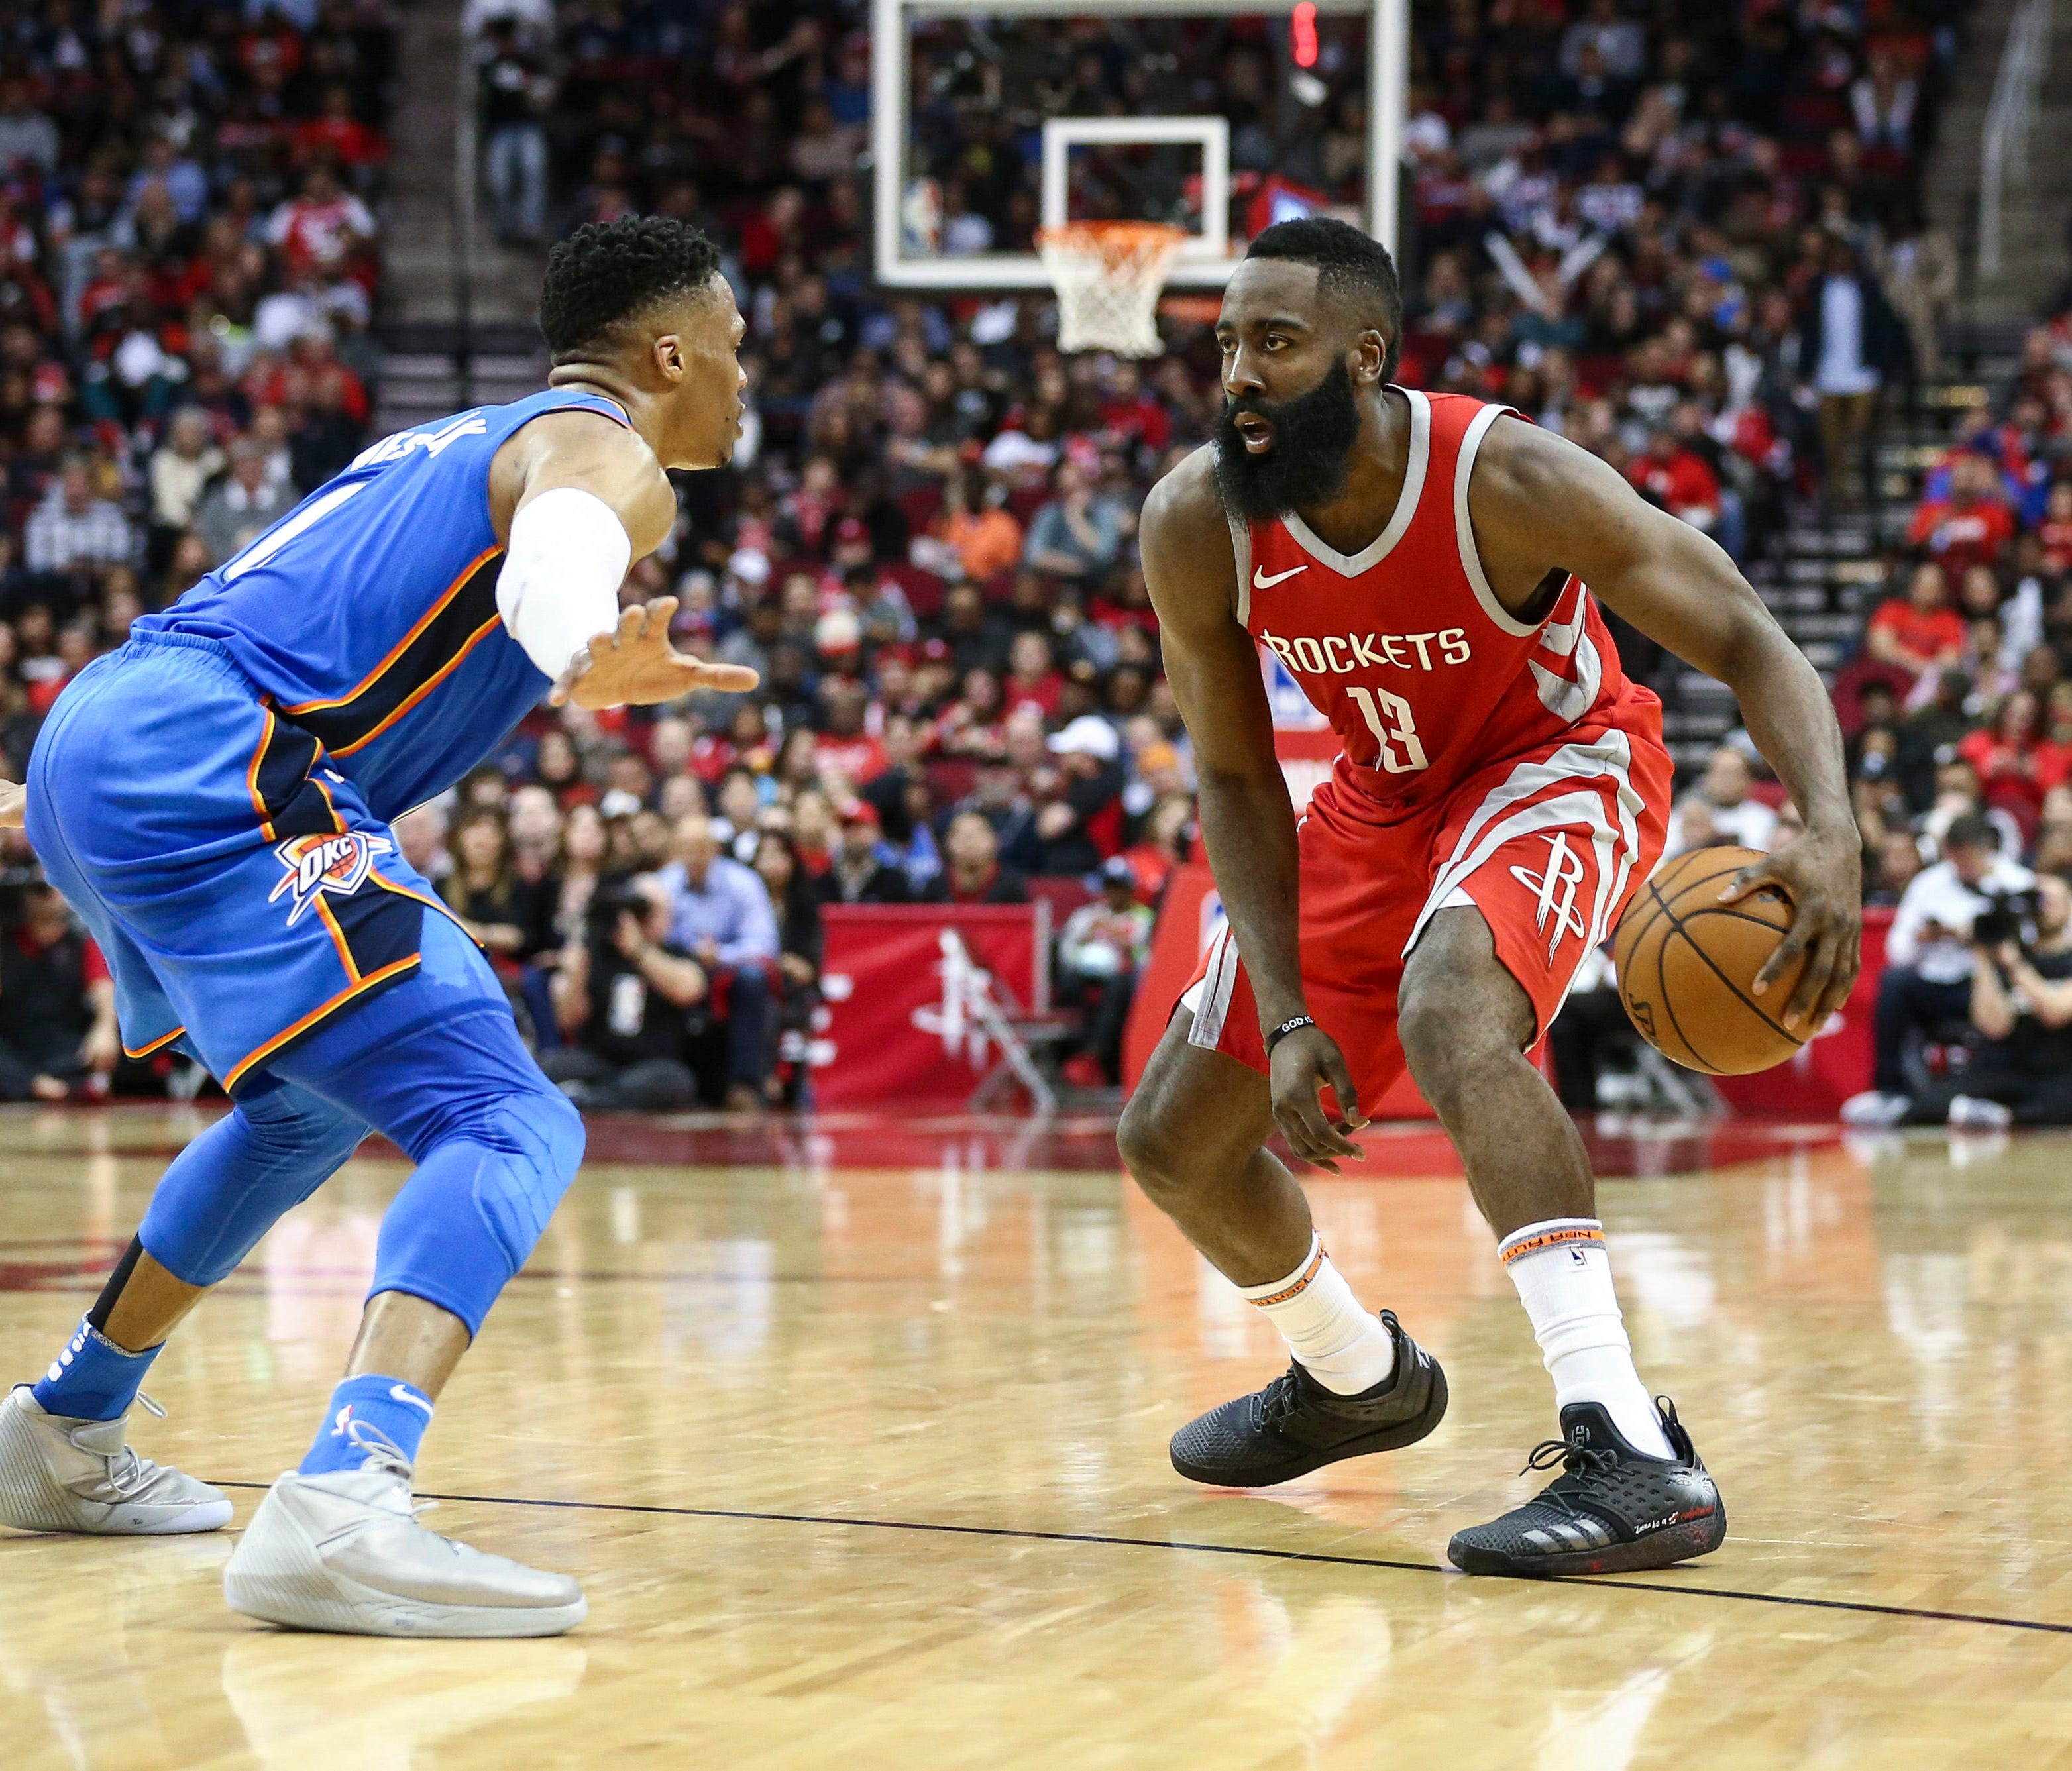 Houston Rockets guard James Harden (13) dribbles the ball as Oklahoma City Thunder guard Russell Westbrook (0) defends during the second quarter at Toyota Center.